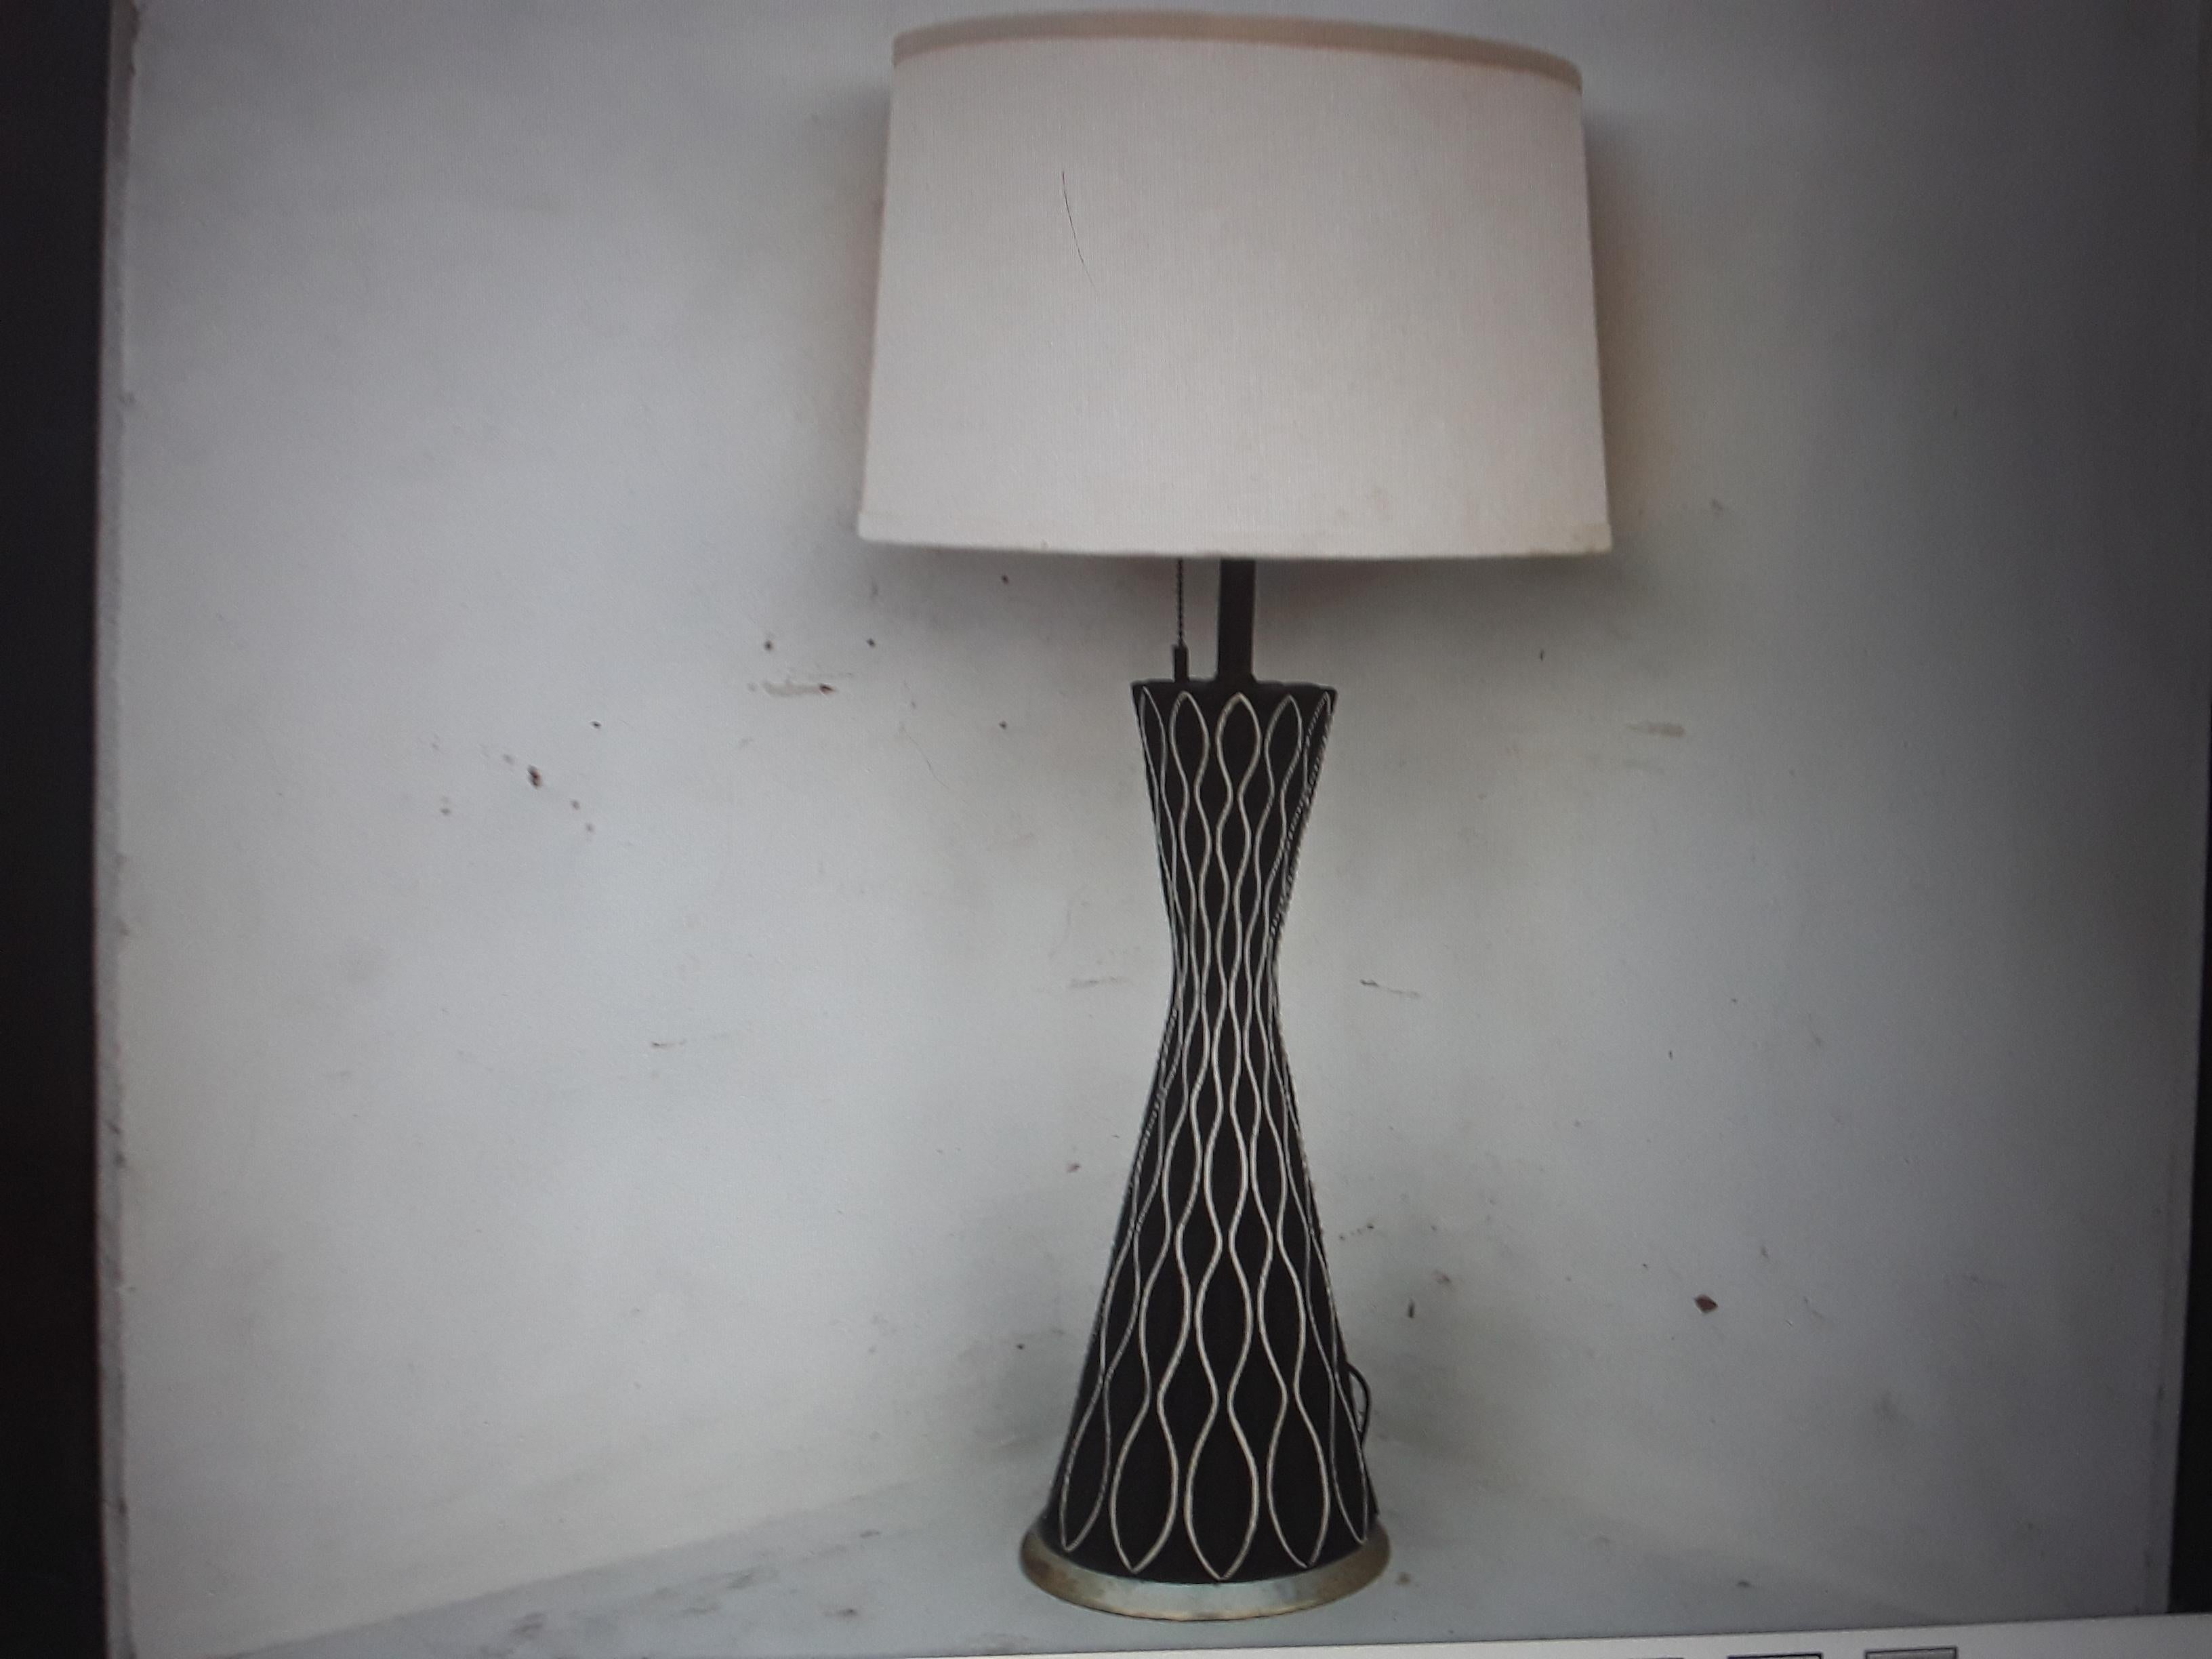 American 1960's Atomic Age Mid Century Modern Futuristic 3 Light Table Lamp For Sale